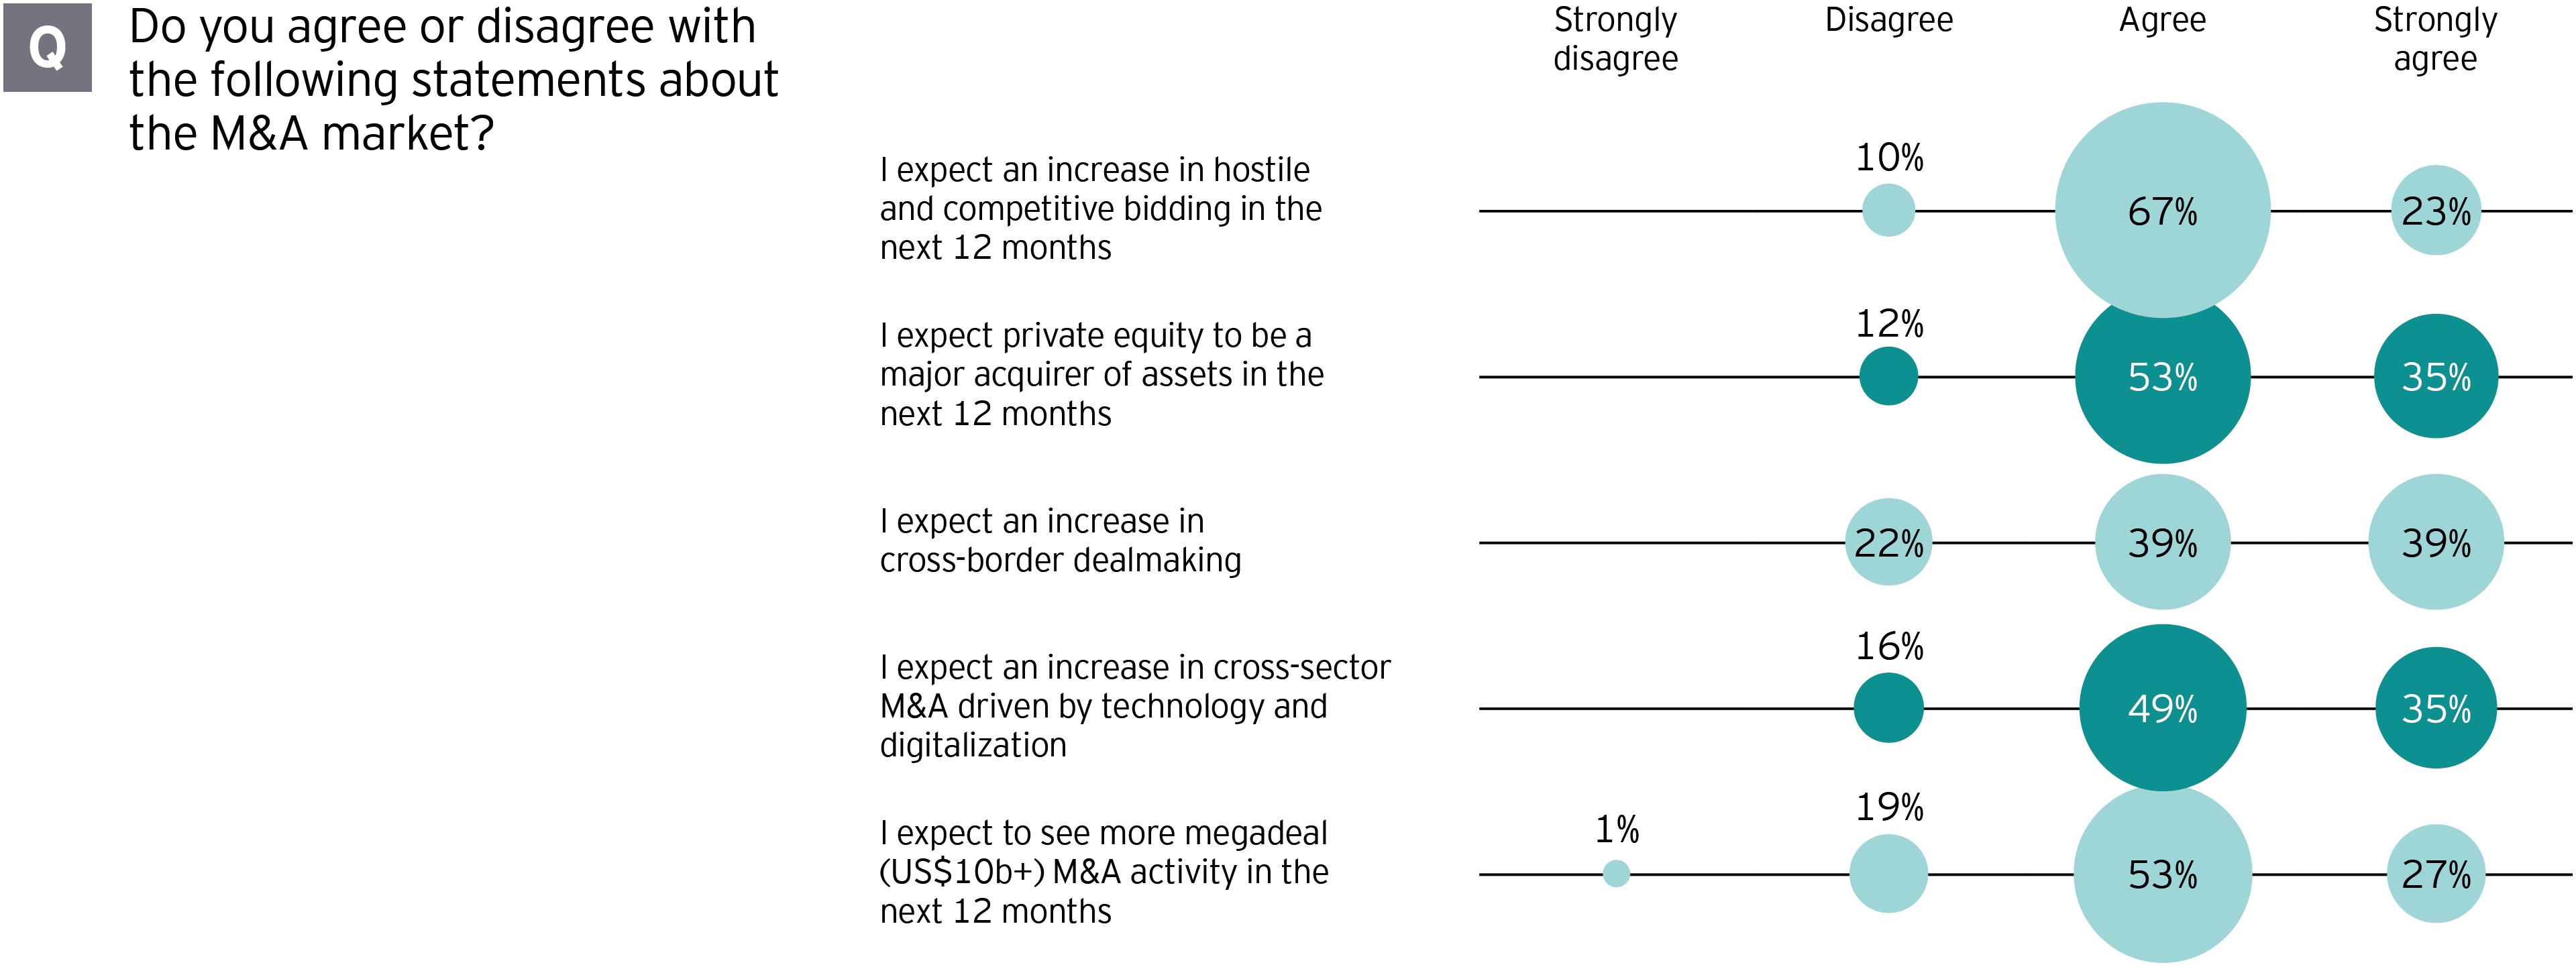 Graphic: Do you agree or disagree with the following statements about the M&A market?